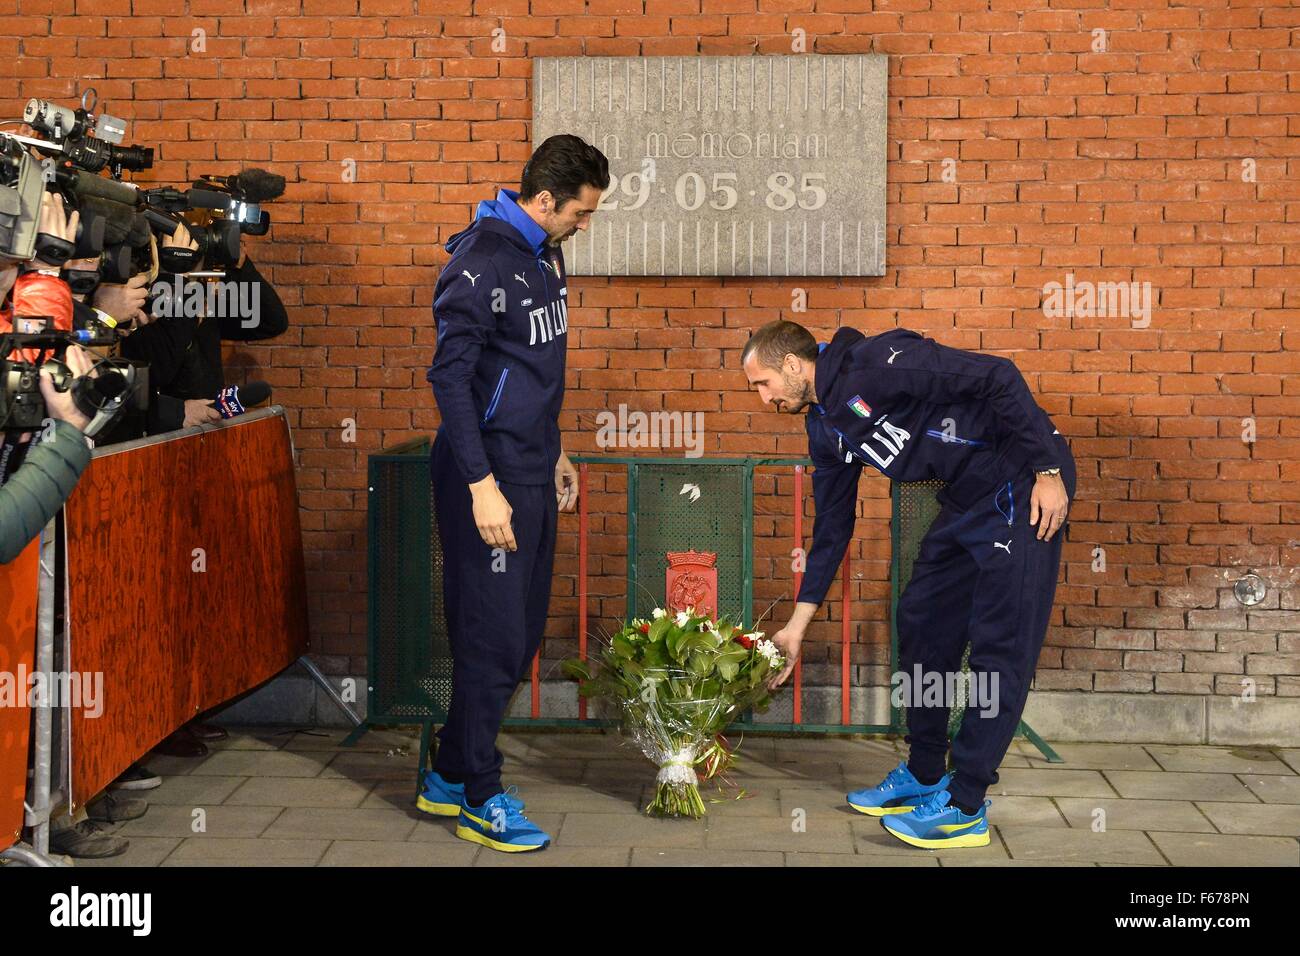 12.11.2015. King Baudouin Stadium (Formerly Heysel Stadium) Brussels, Belgium. The Juventus team visit the location where 39 fans from Liverpool and Juventus were killed during riots at the European cup final in May 1985 (30 years ago).  Gianluigi Buffon and Giorgio Chiellini Stock Photo